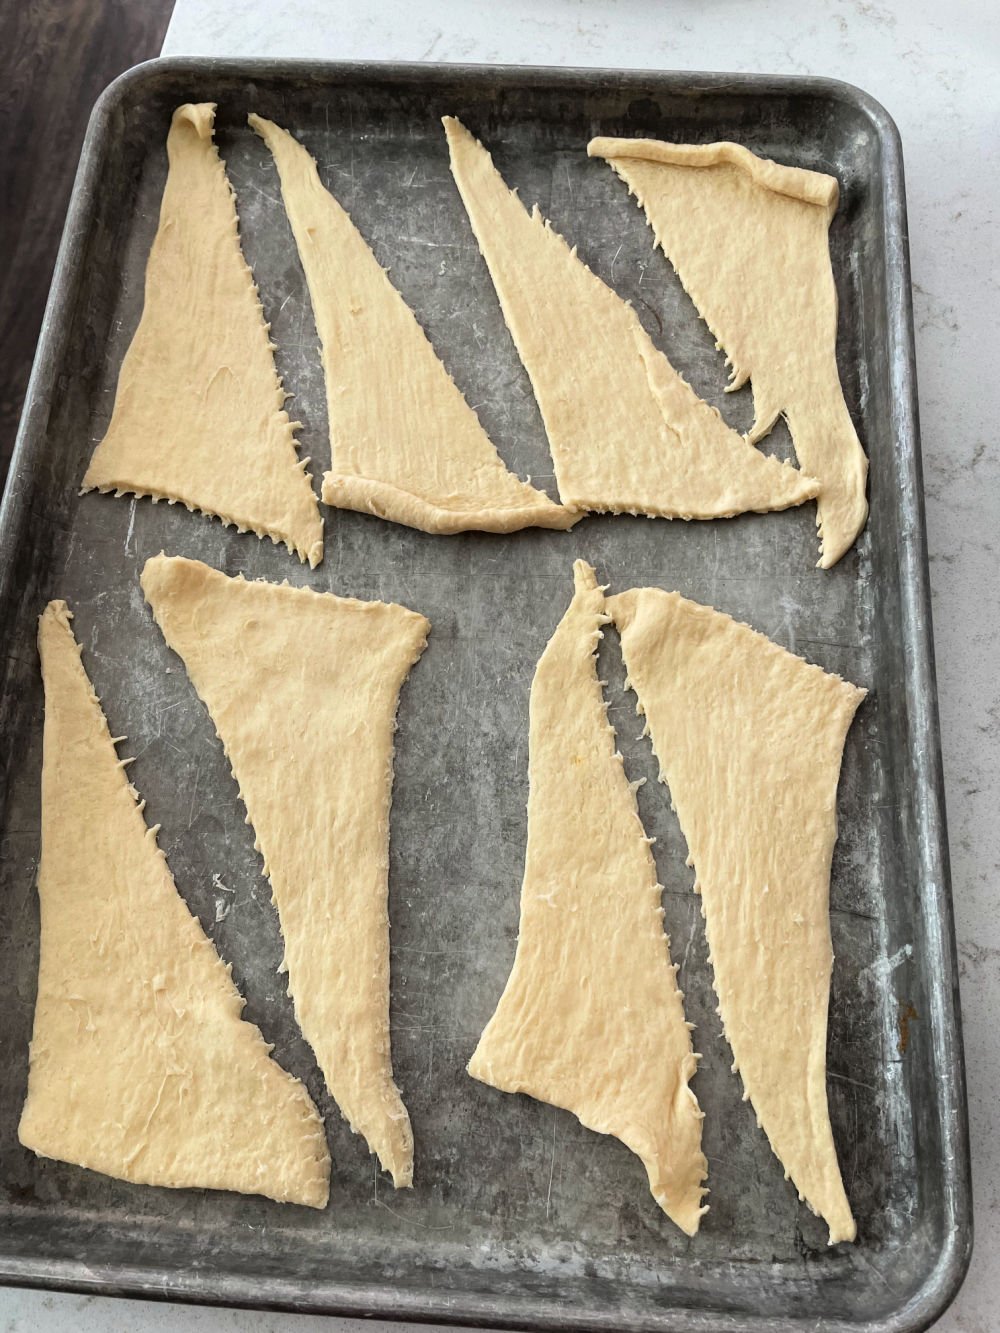 Crescent rolls separated into 8 equal pieces on sheet pan